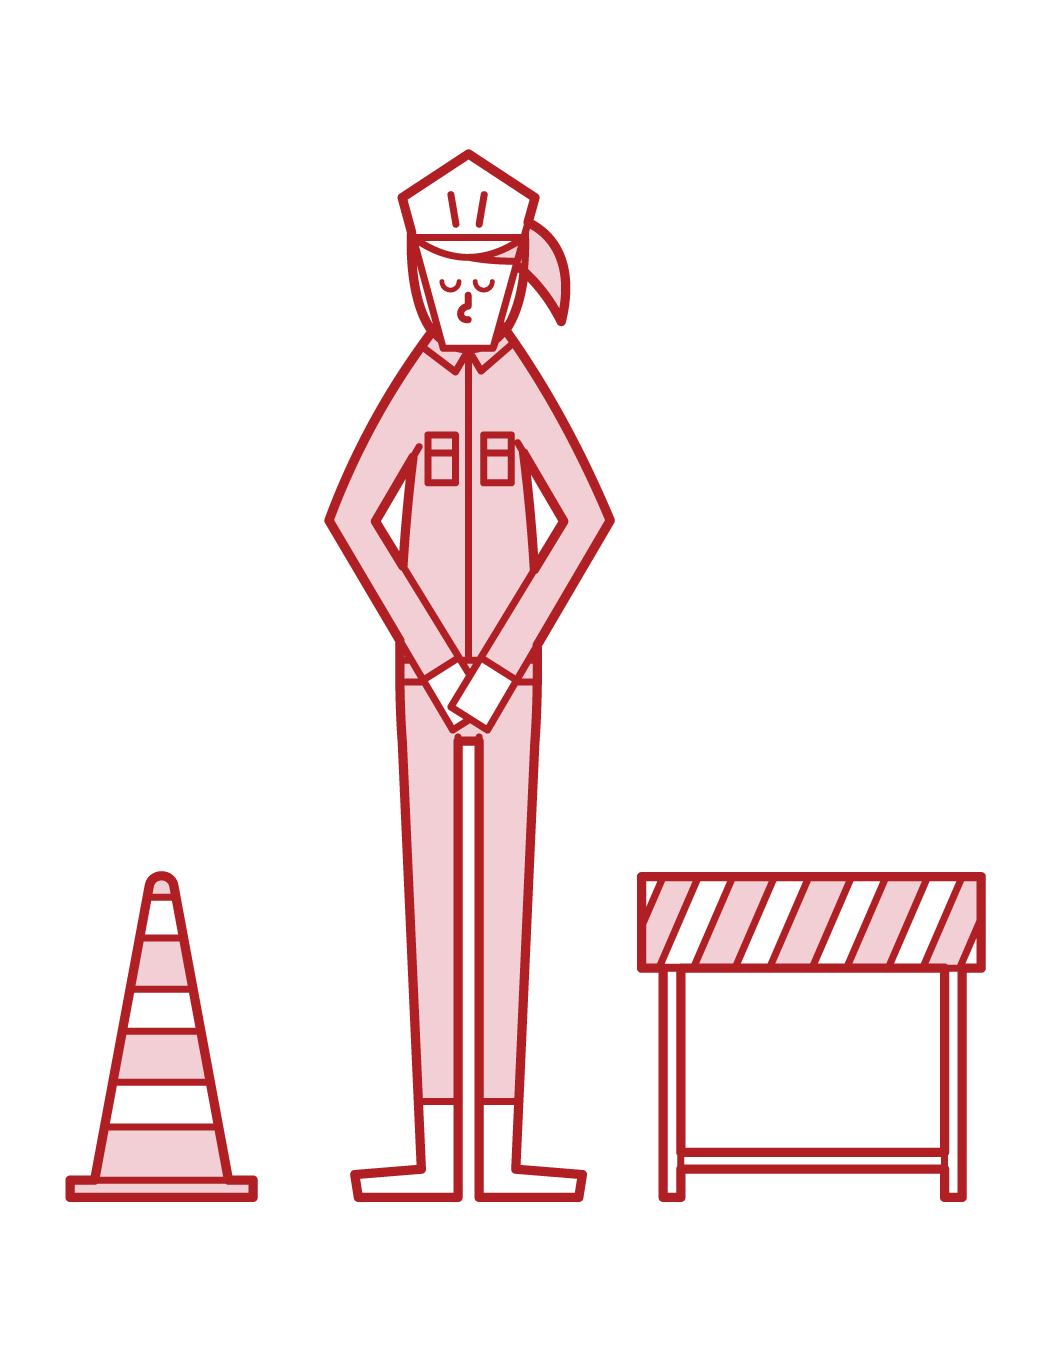 Illustration of a woman under construction